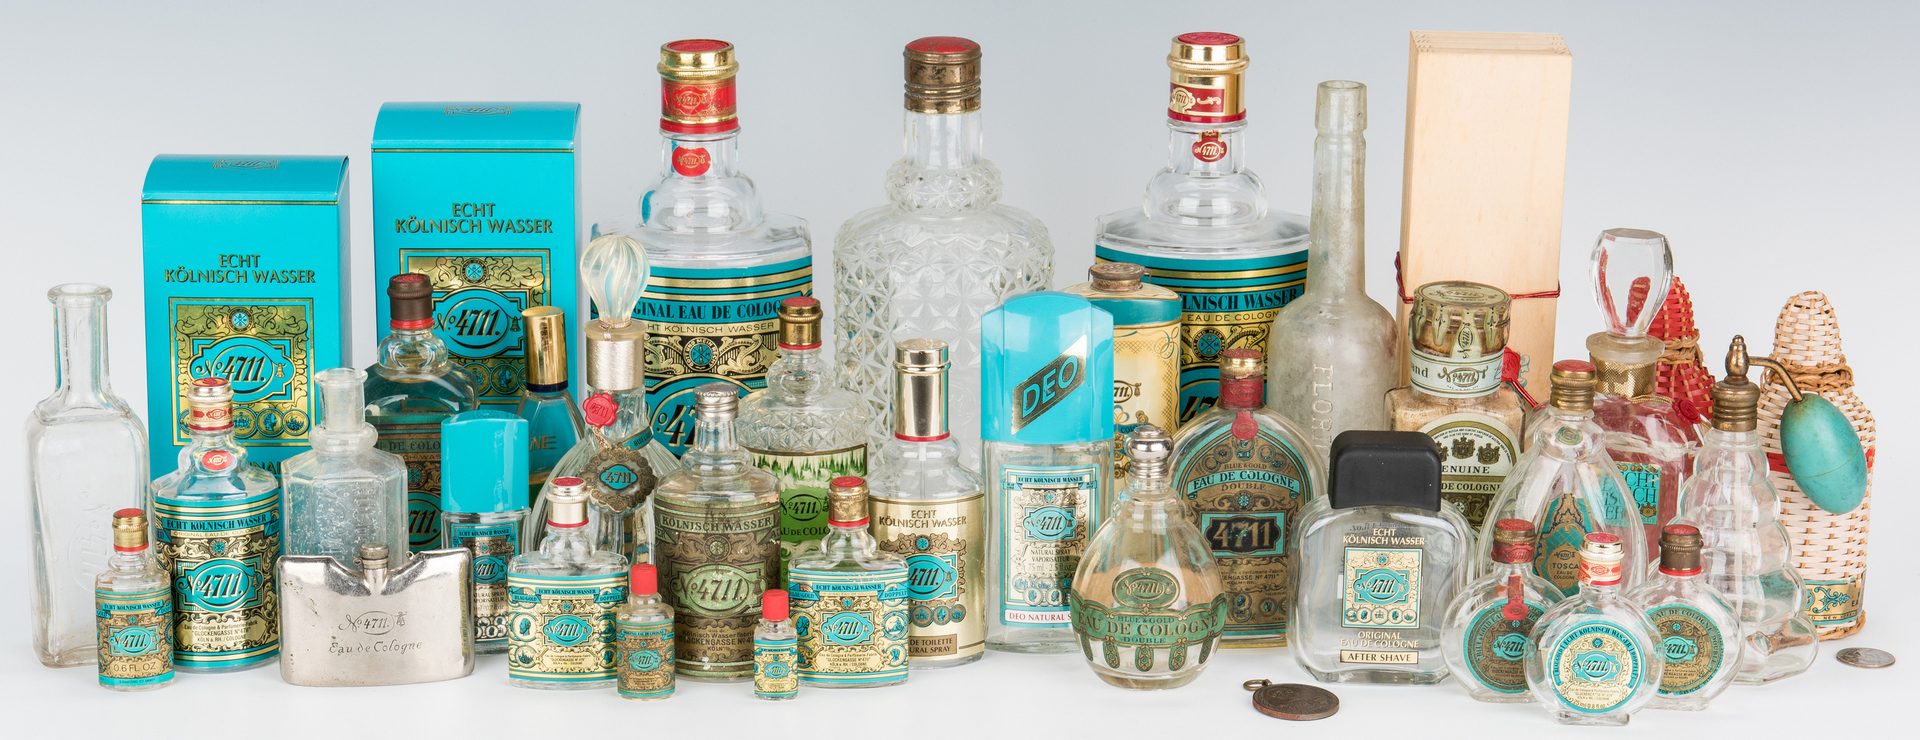 Lot 431: 4711 Brand Perfume Bottle Collection & More